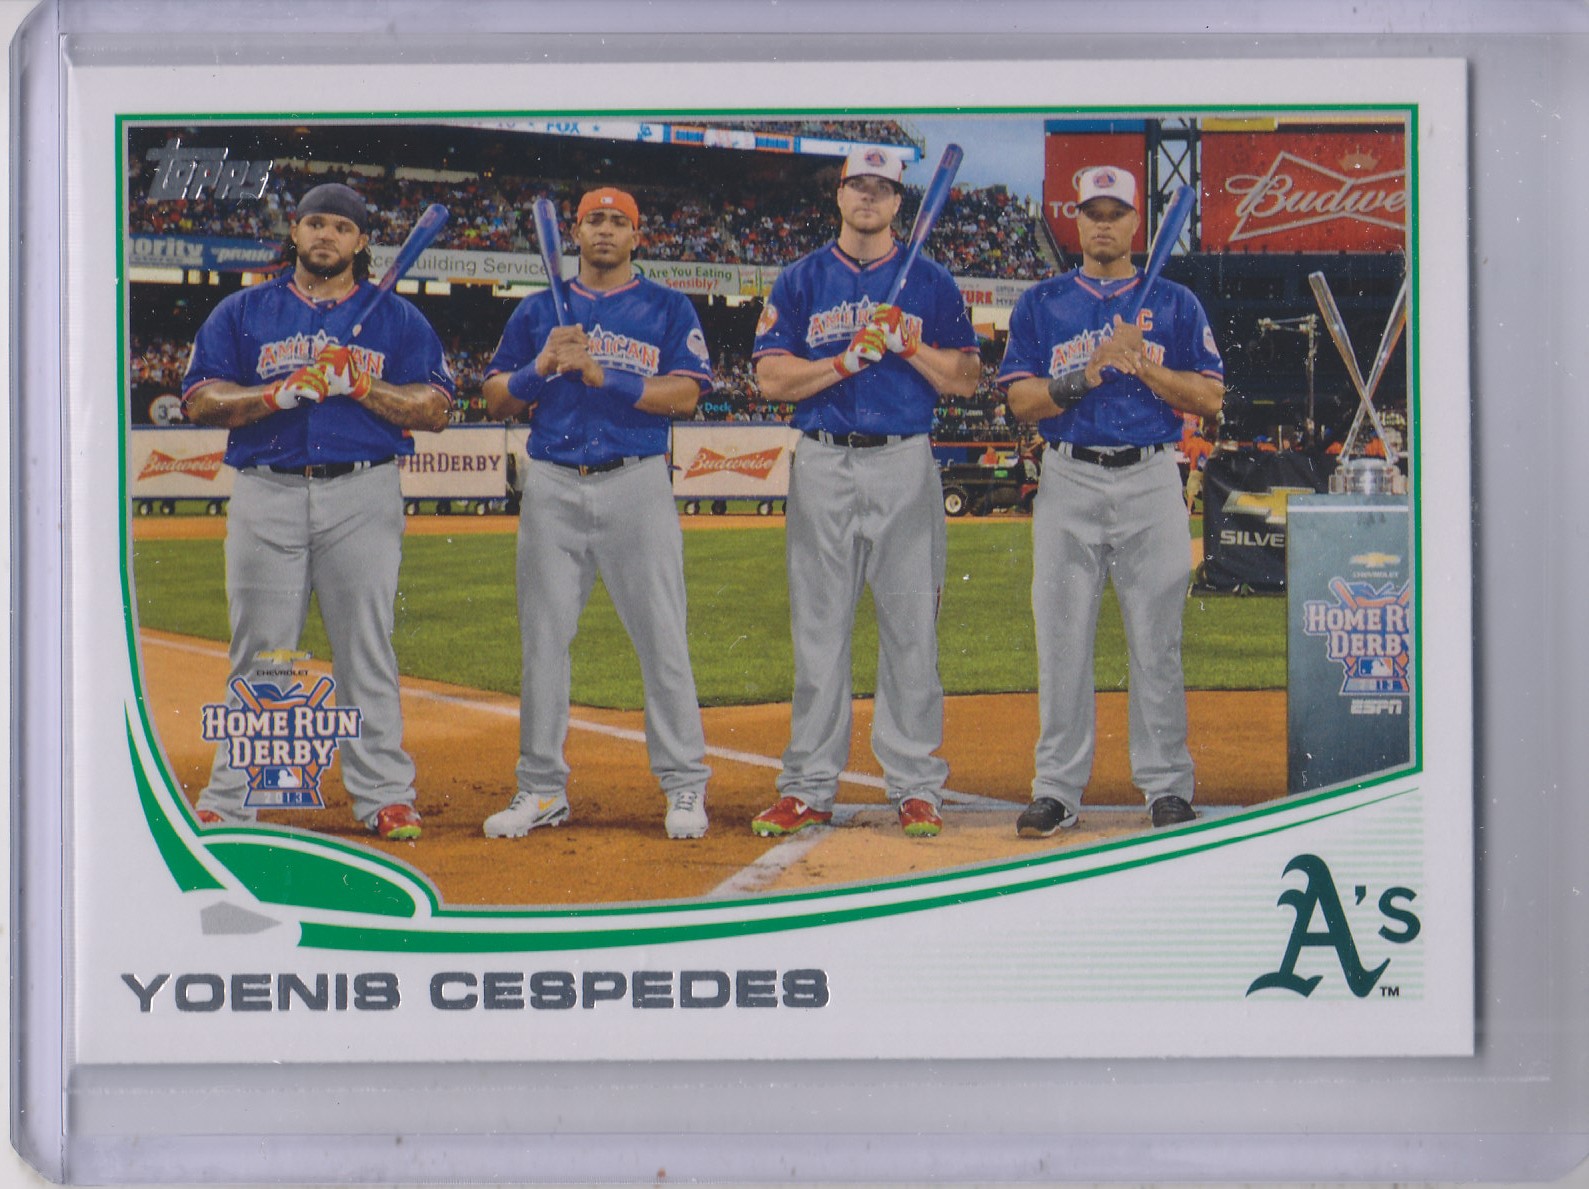 2013 Topps Update #US7C Yoenis Cespedes SP/Group photo